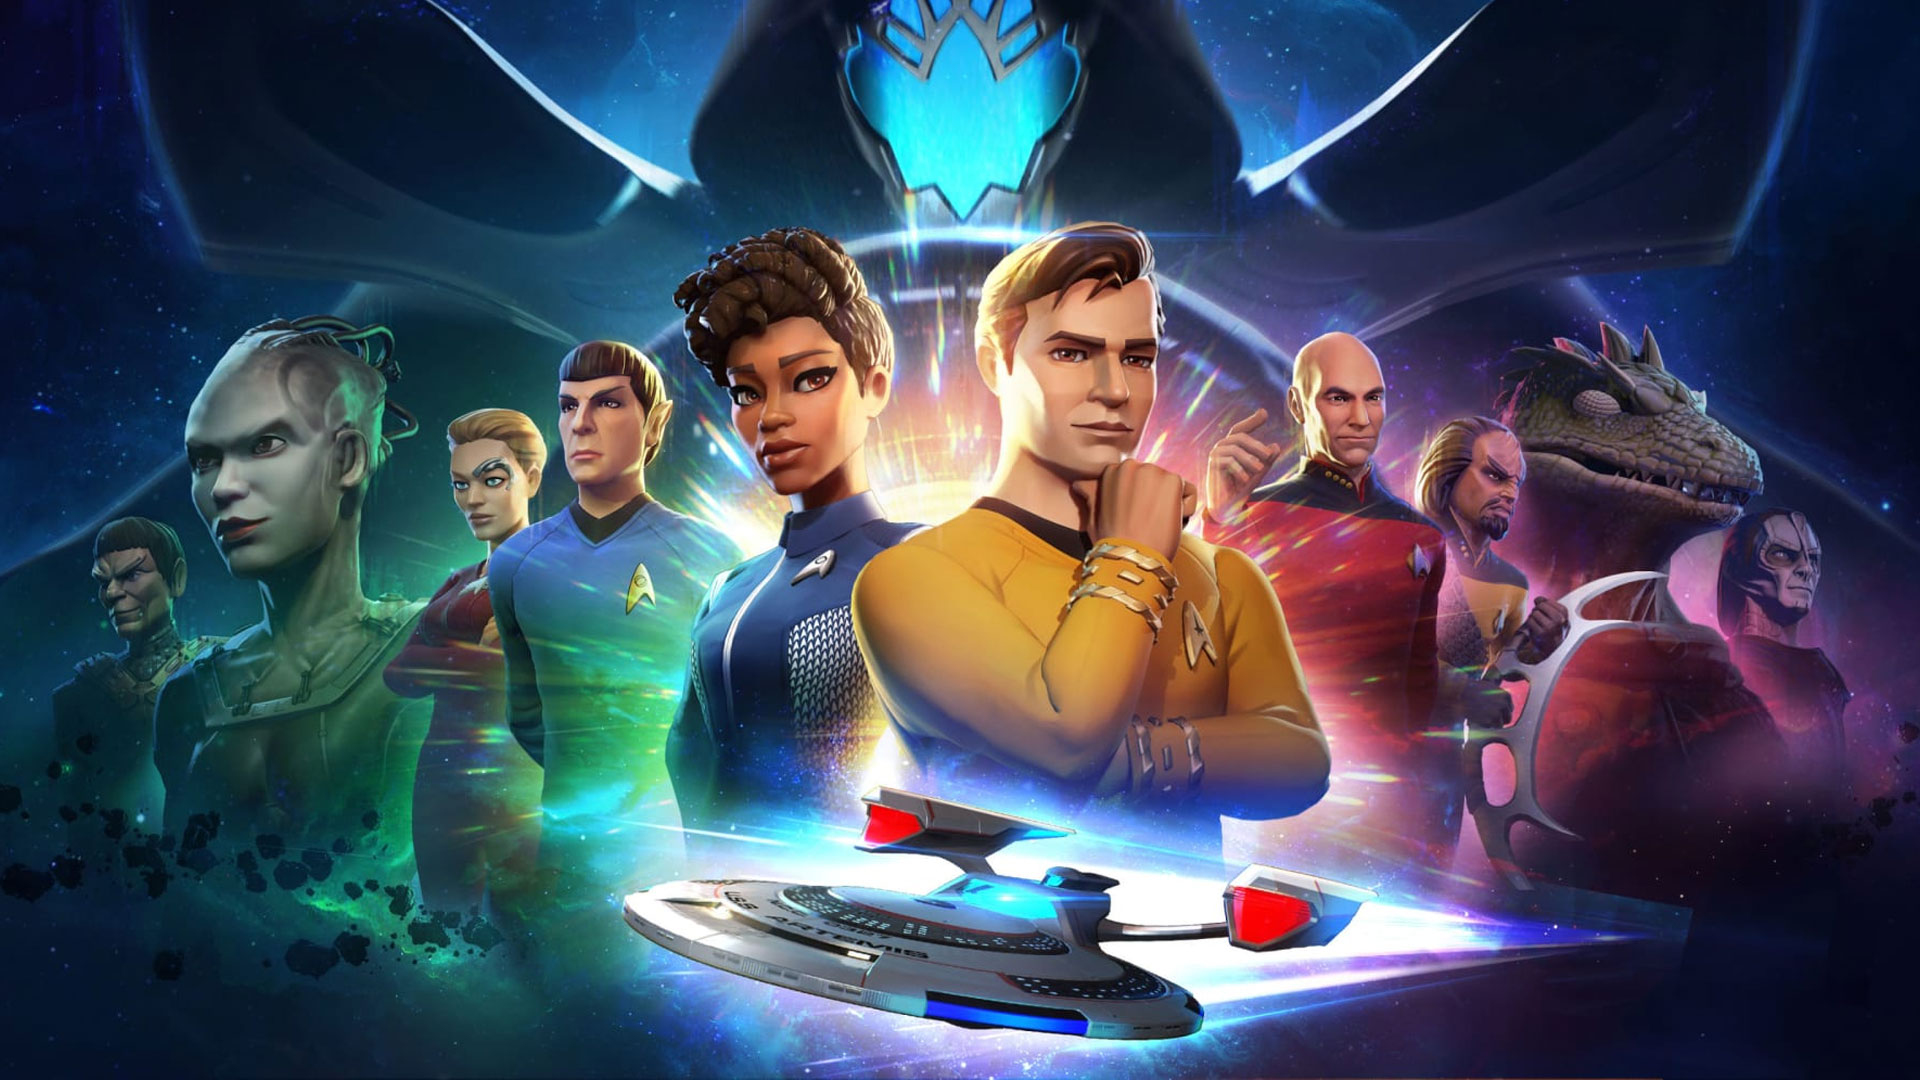 A new Star Trek game seems to have leaked thanks to a convention poster